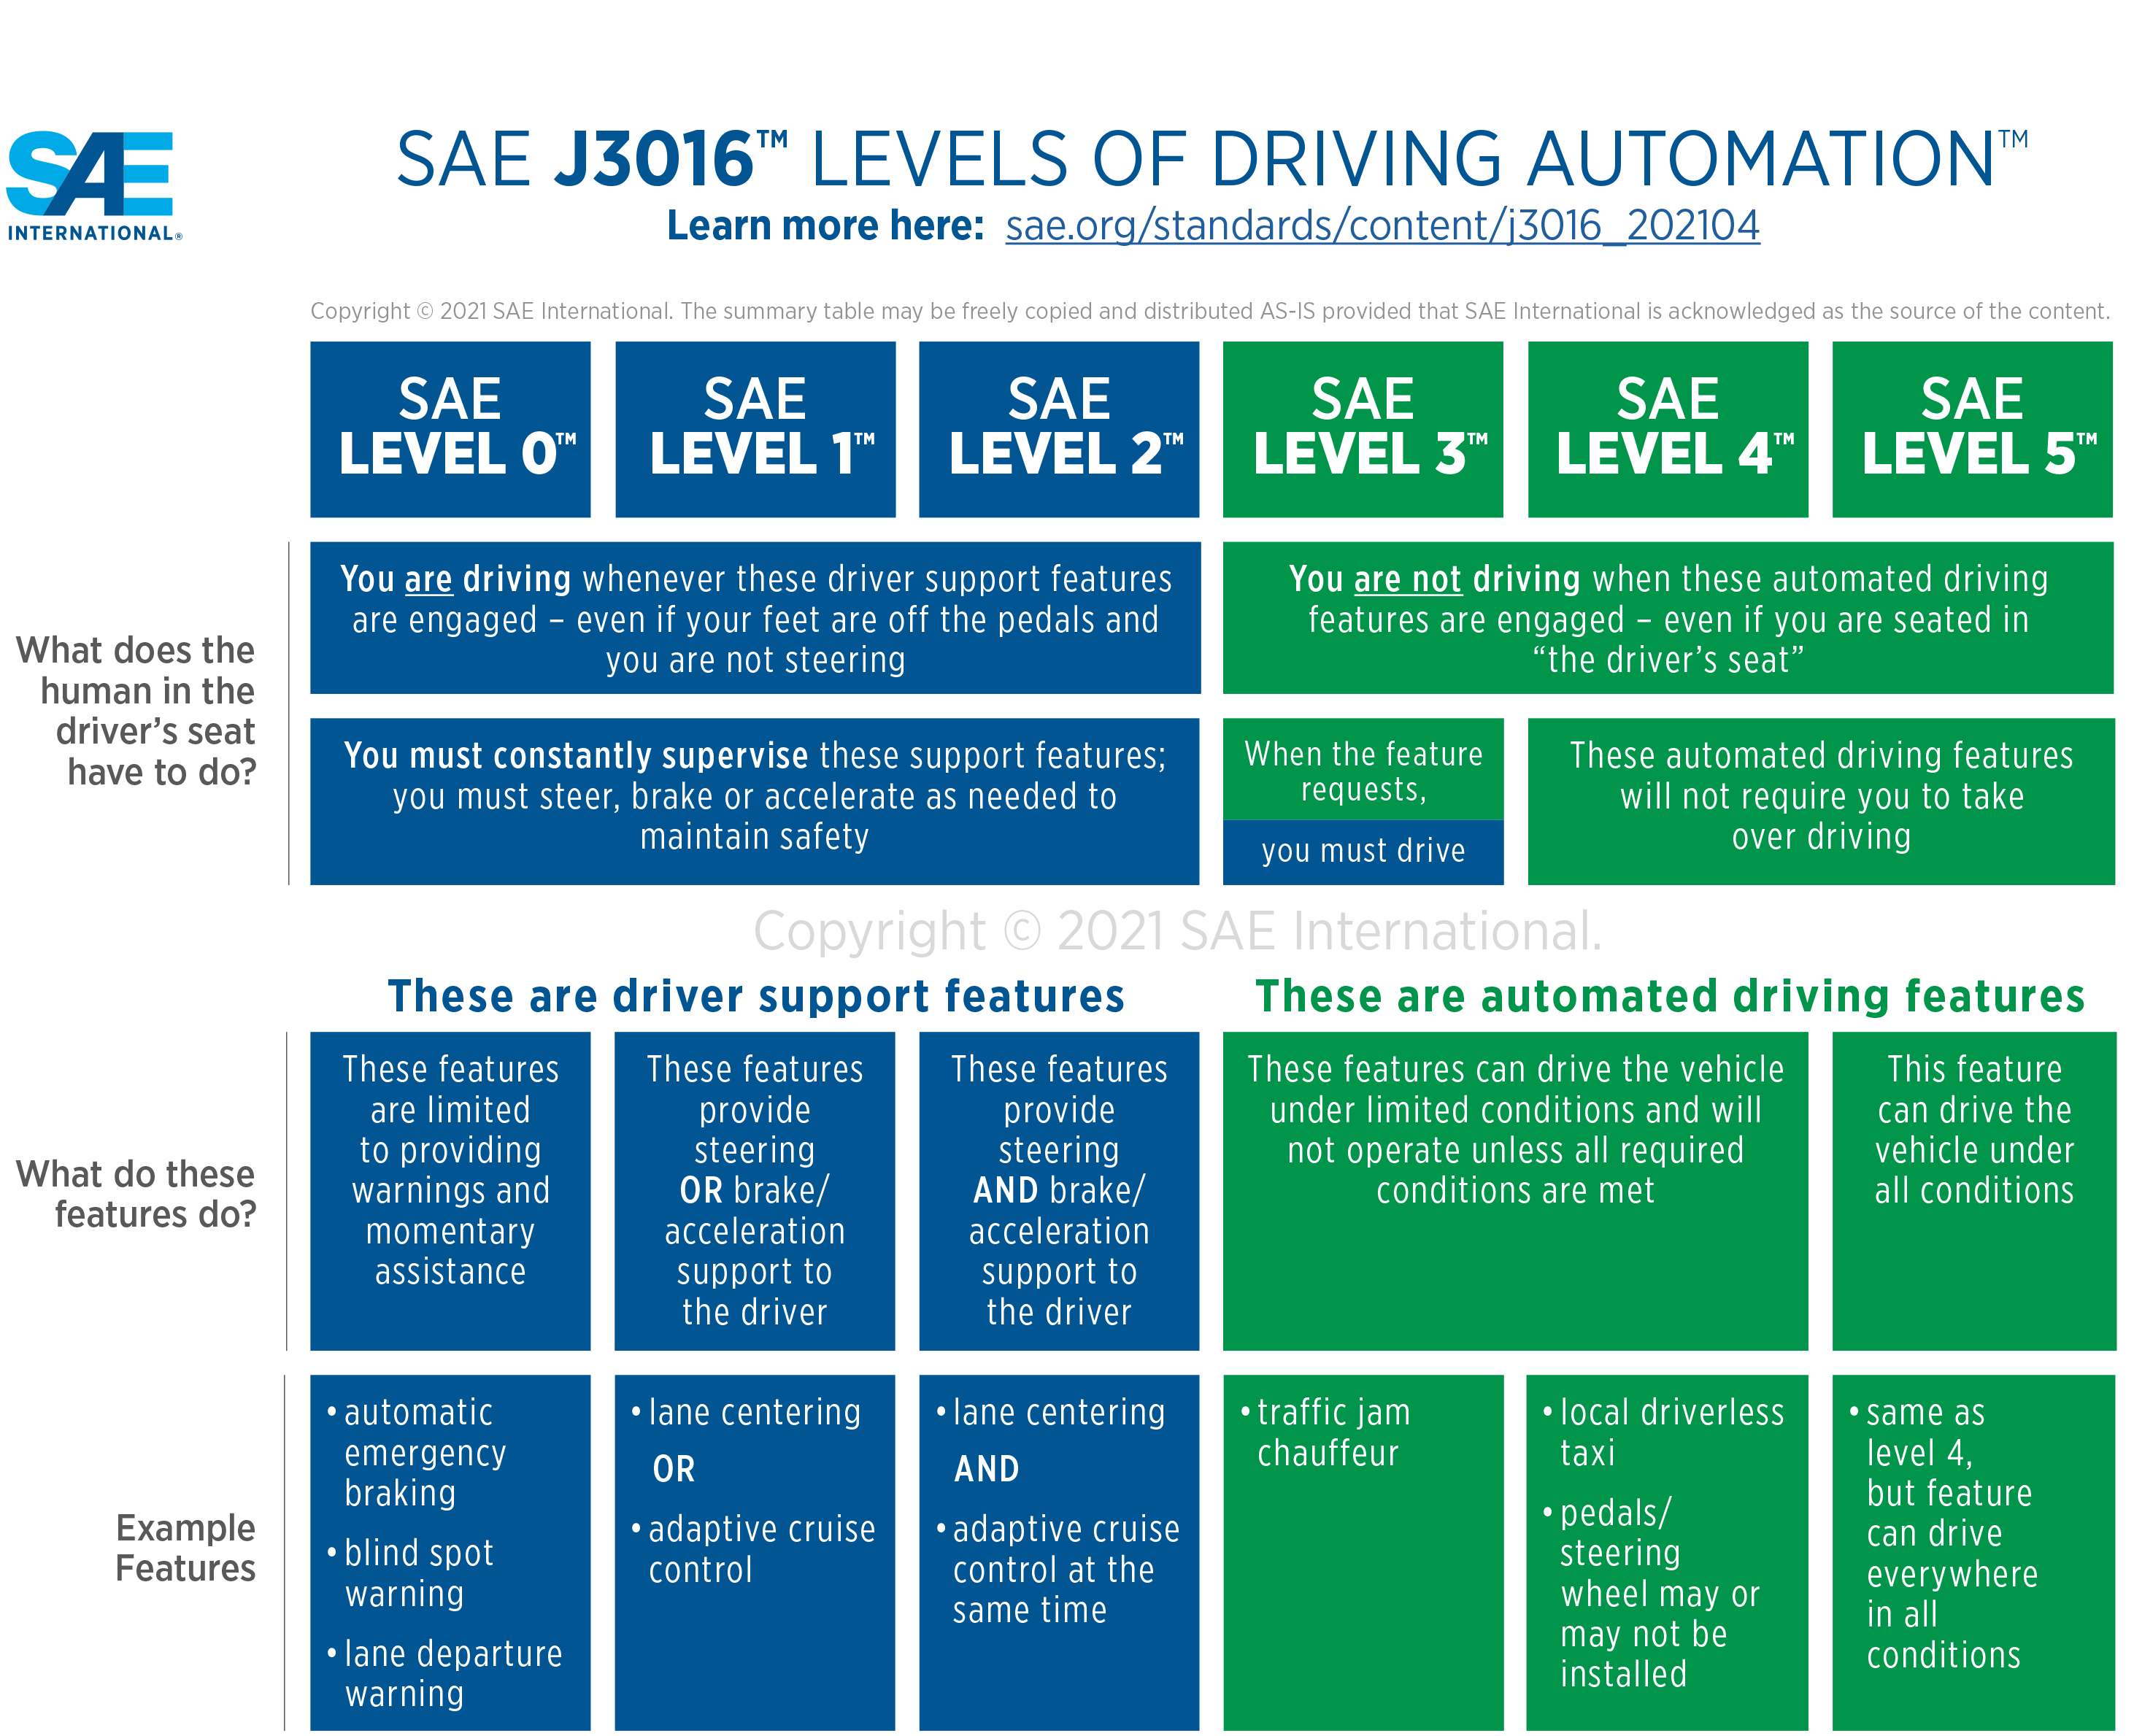 sae-international-automated-driving-levels